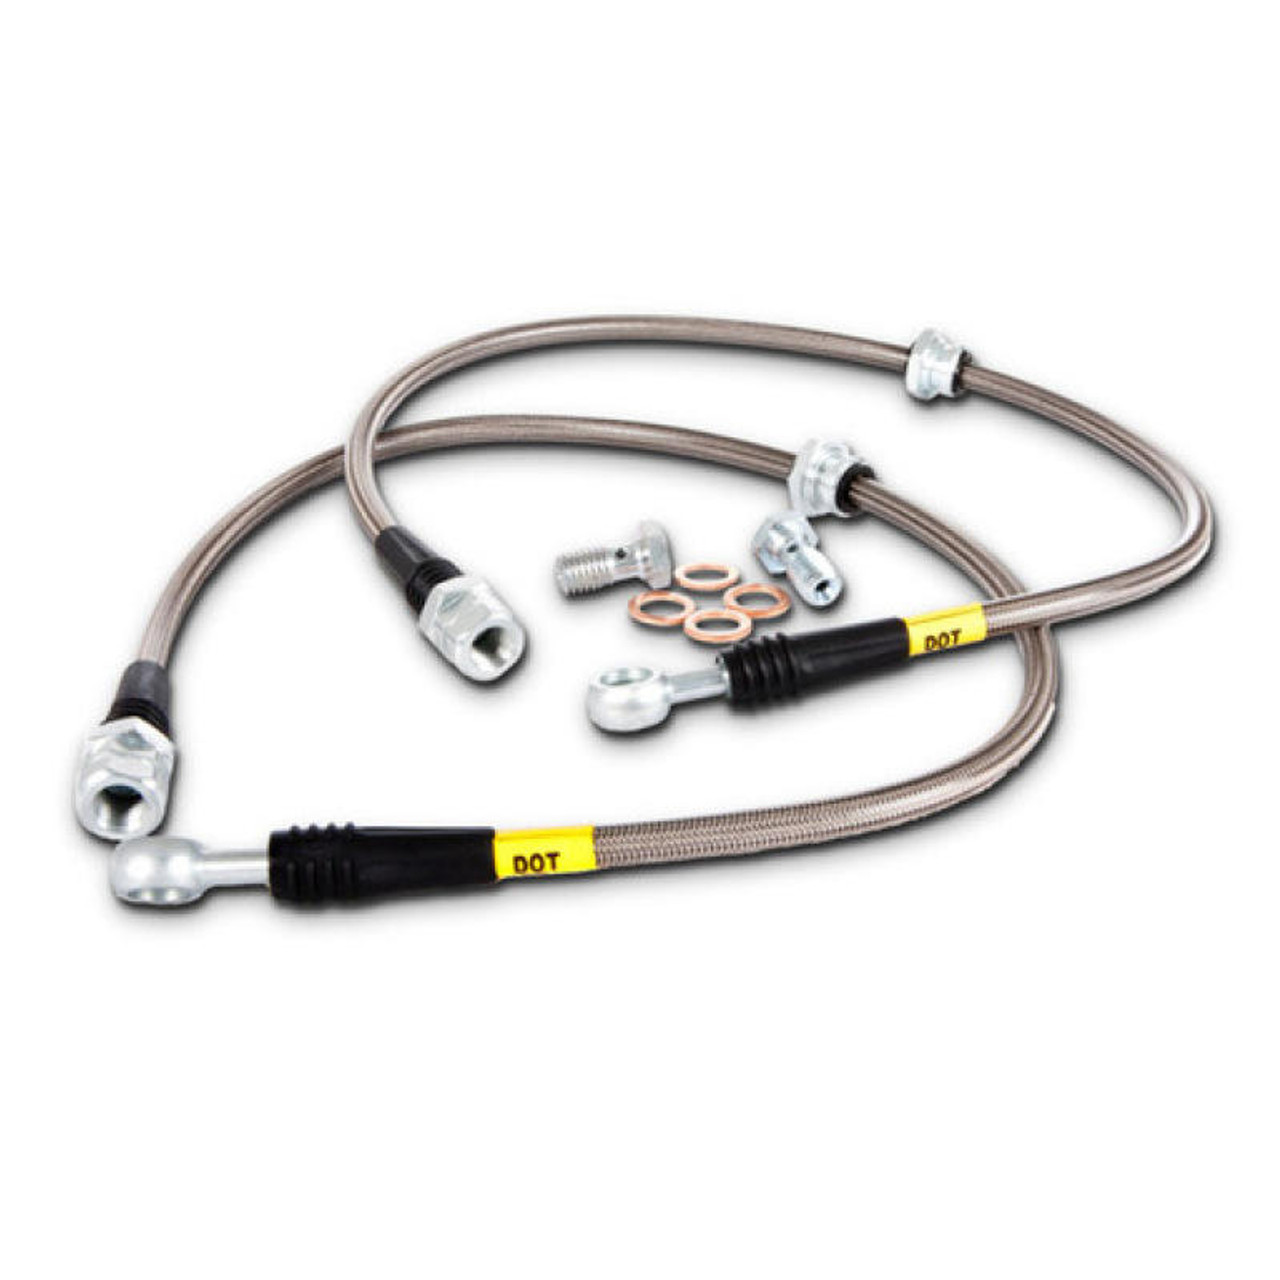 Stoptech StopTech BMW Stainless Steel Front Brake Lines - 950.34006